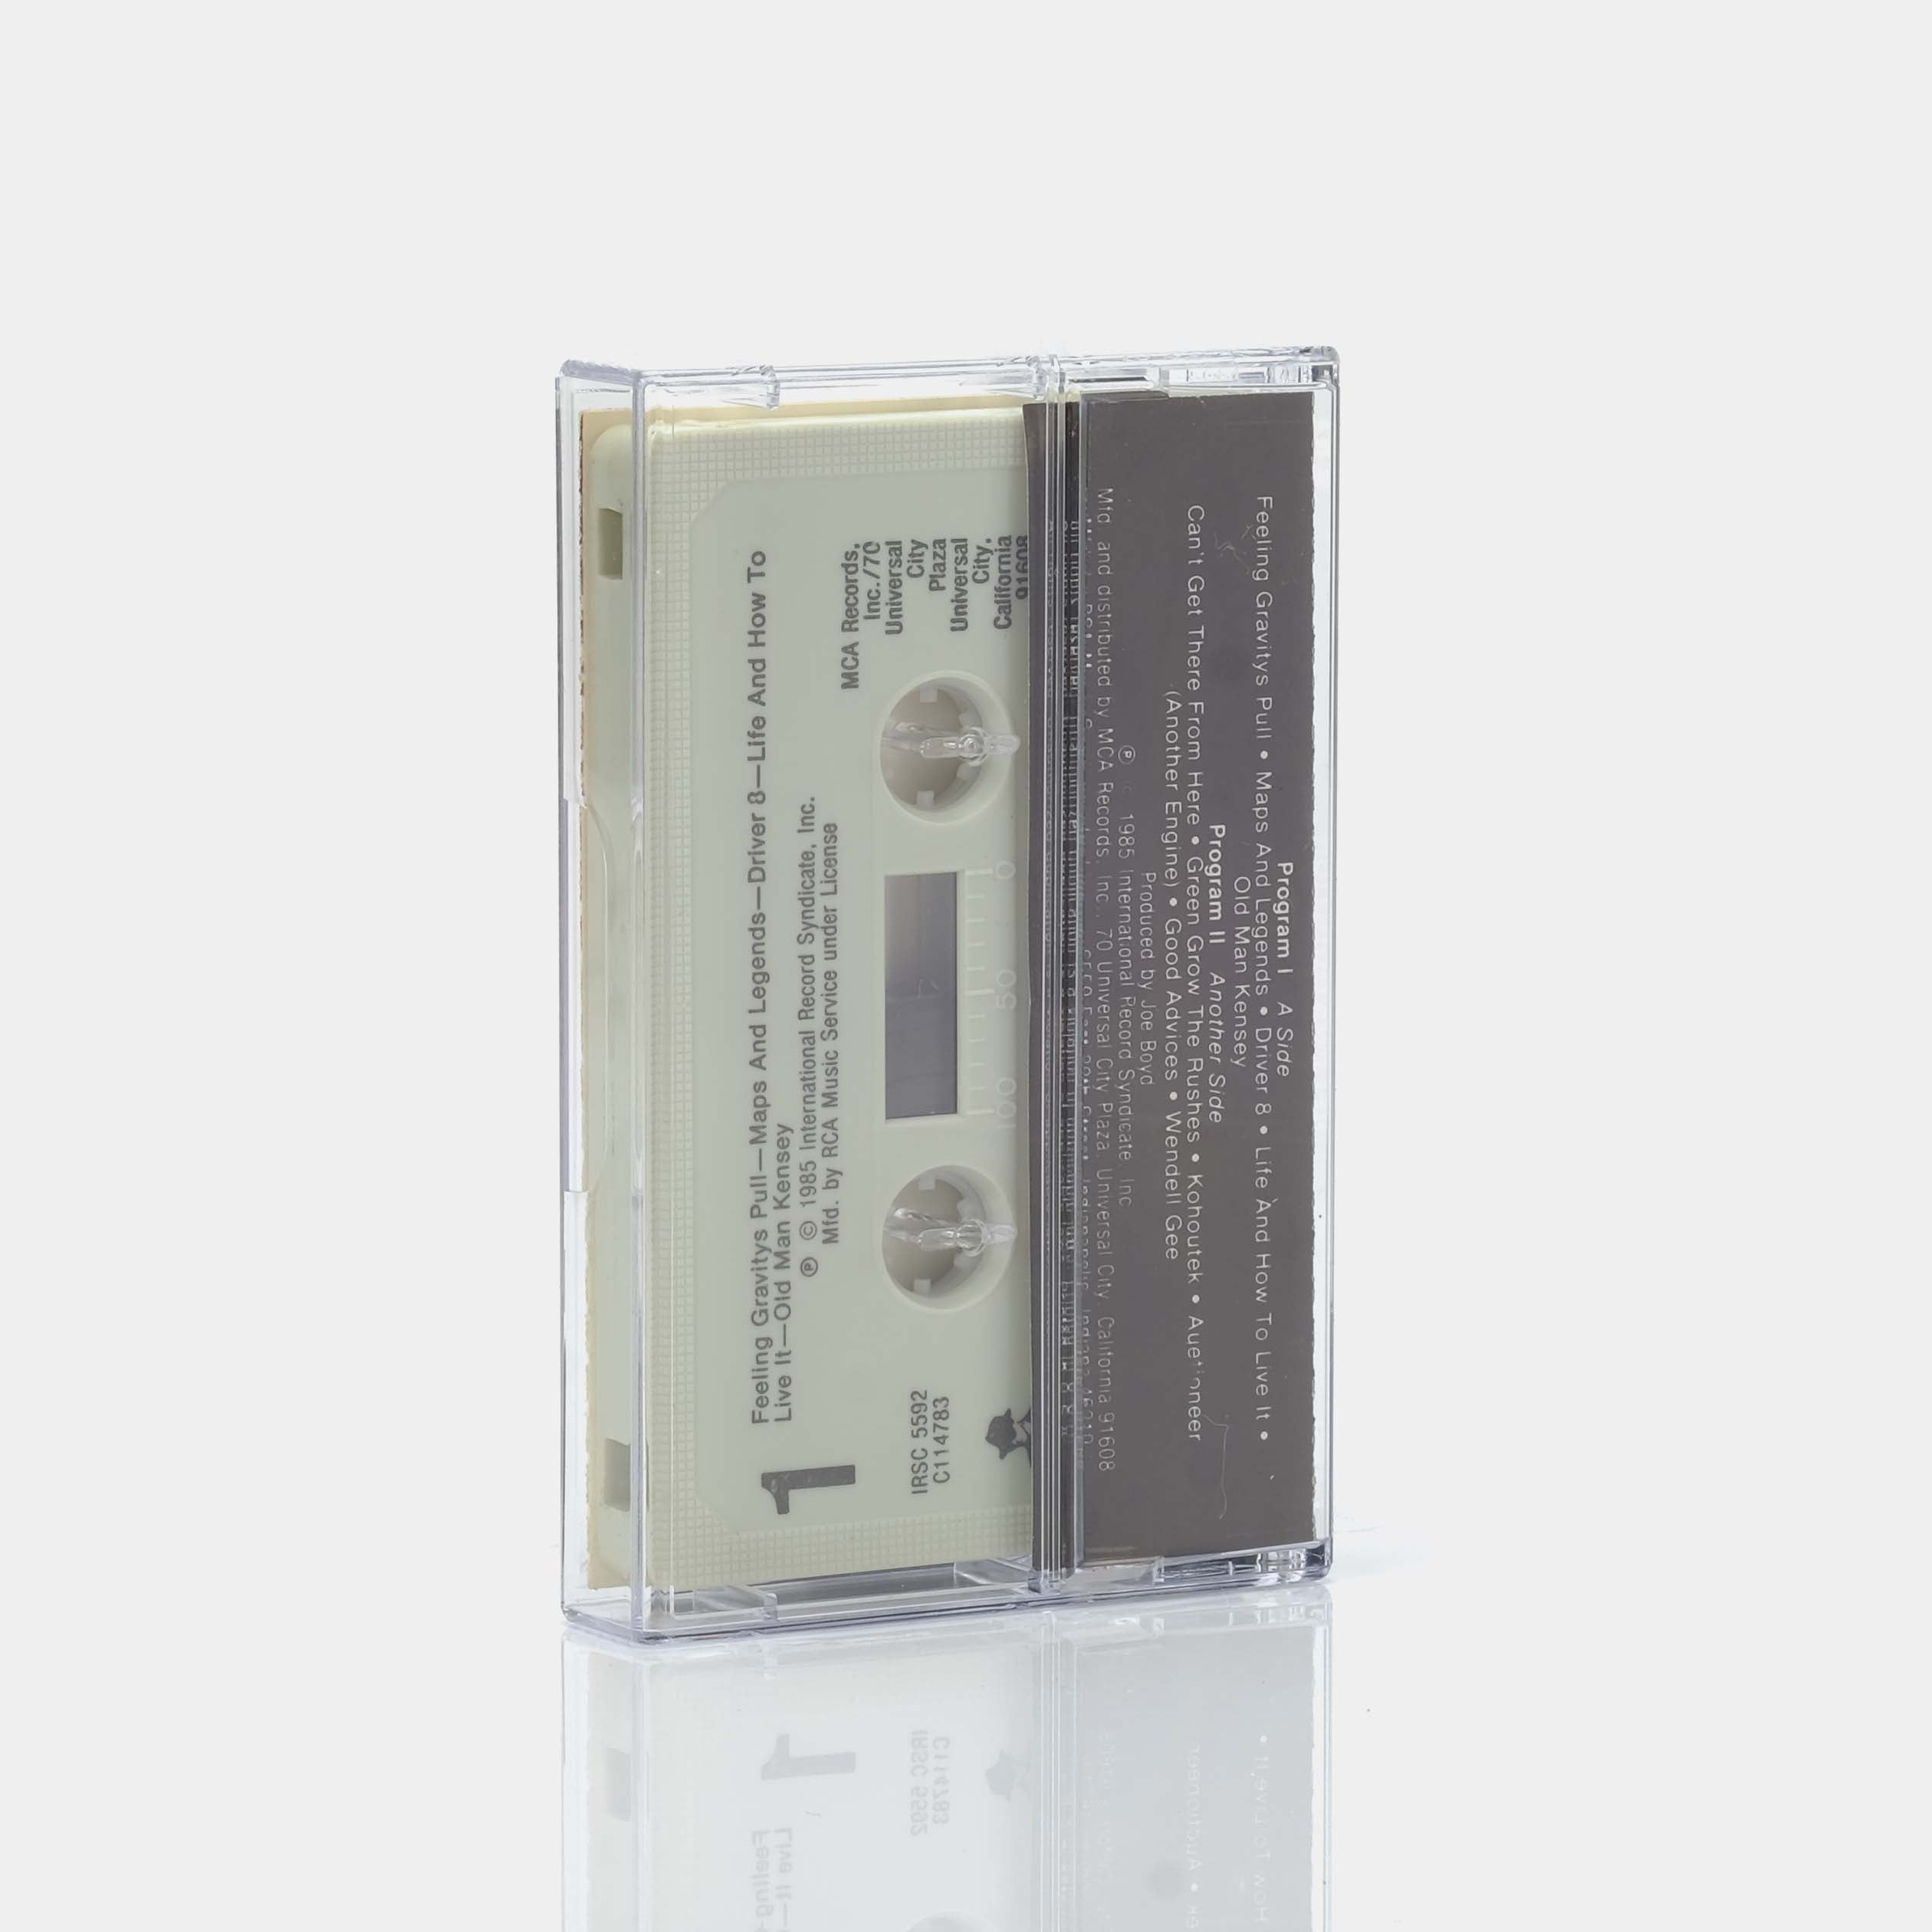 R.E.M. - Fables Of The Reconstruction/Reconstruction Of The Fables Cassette Tape